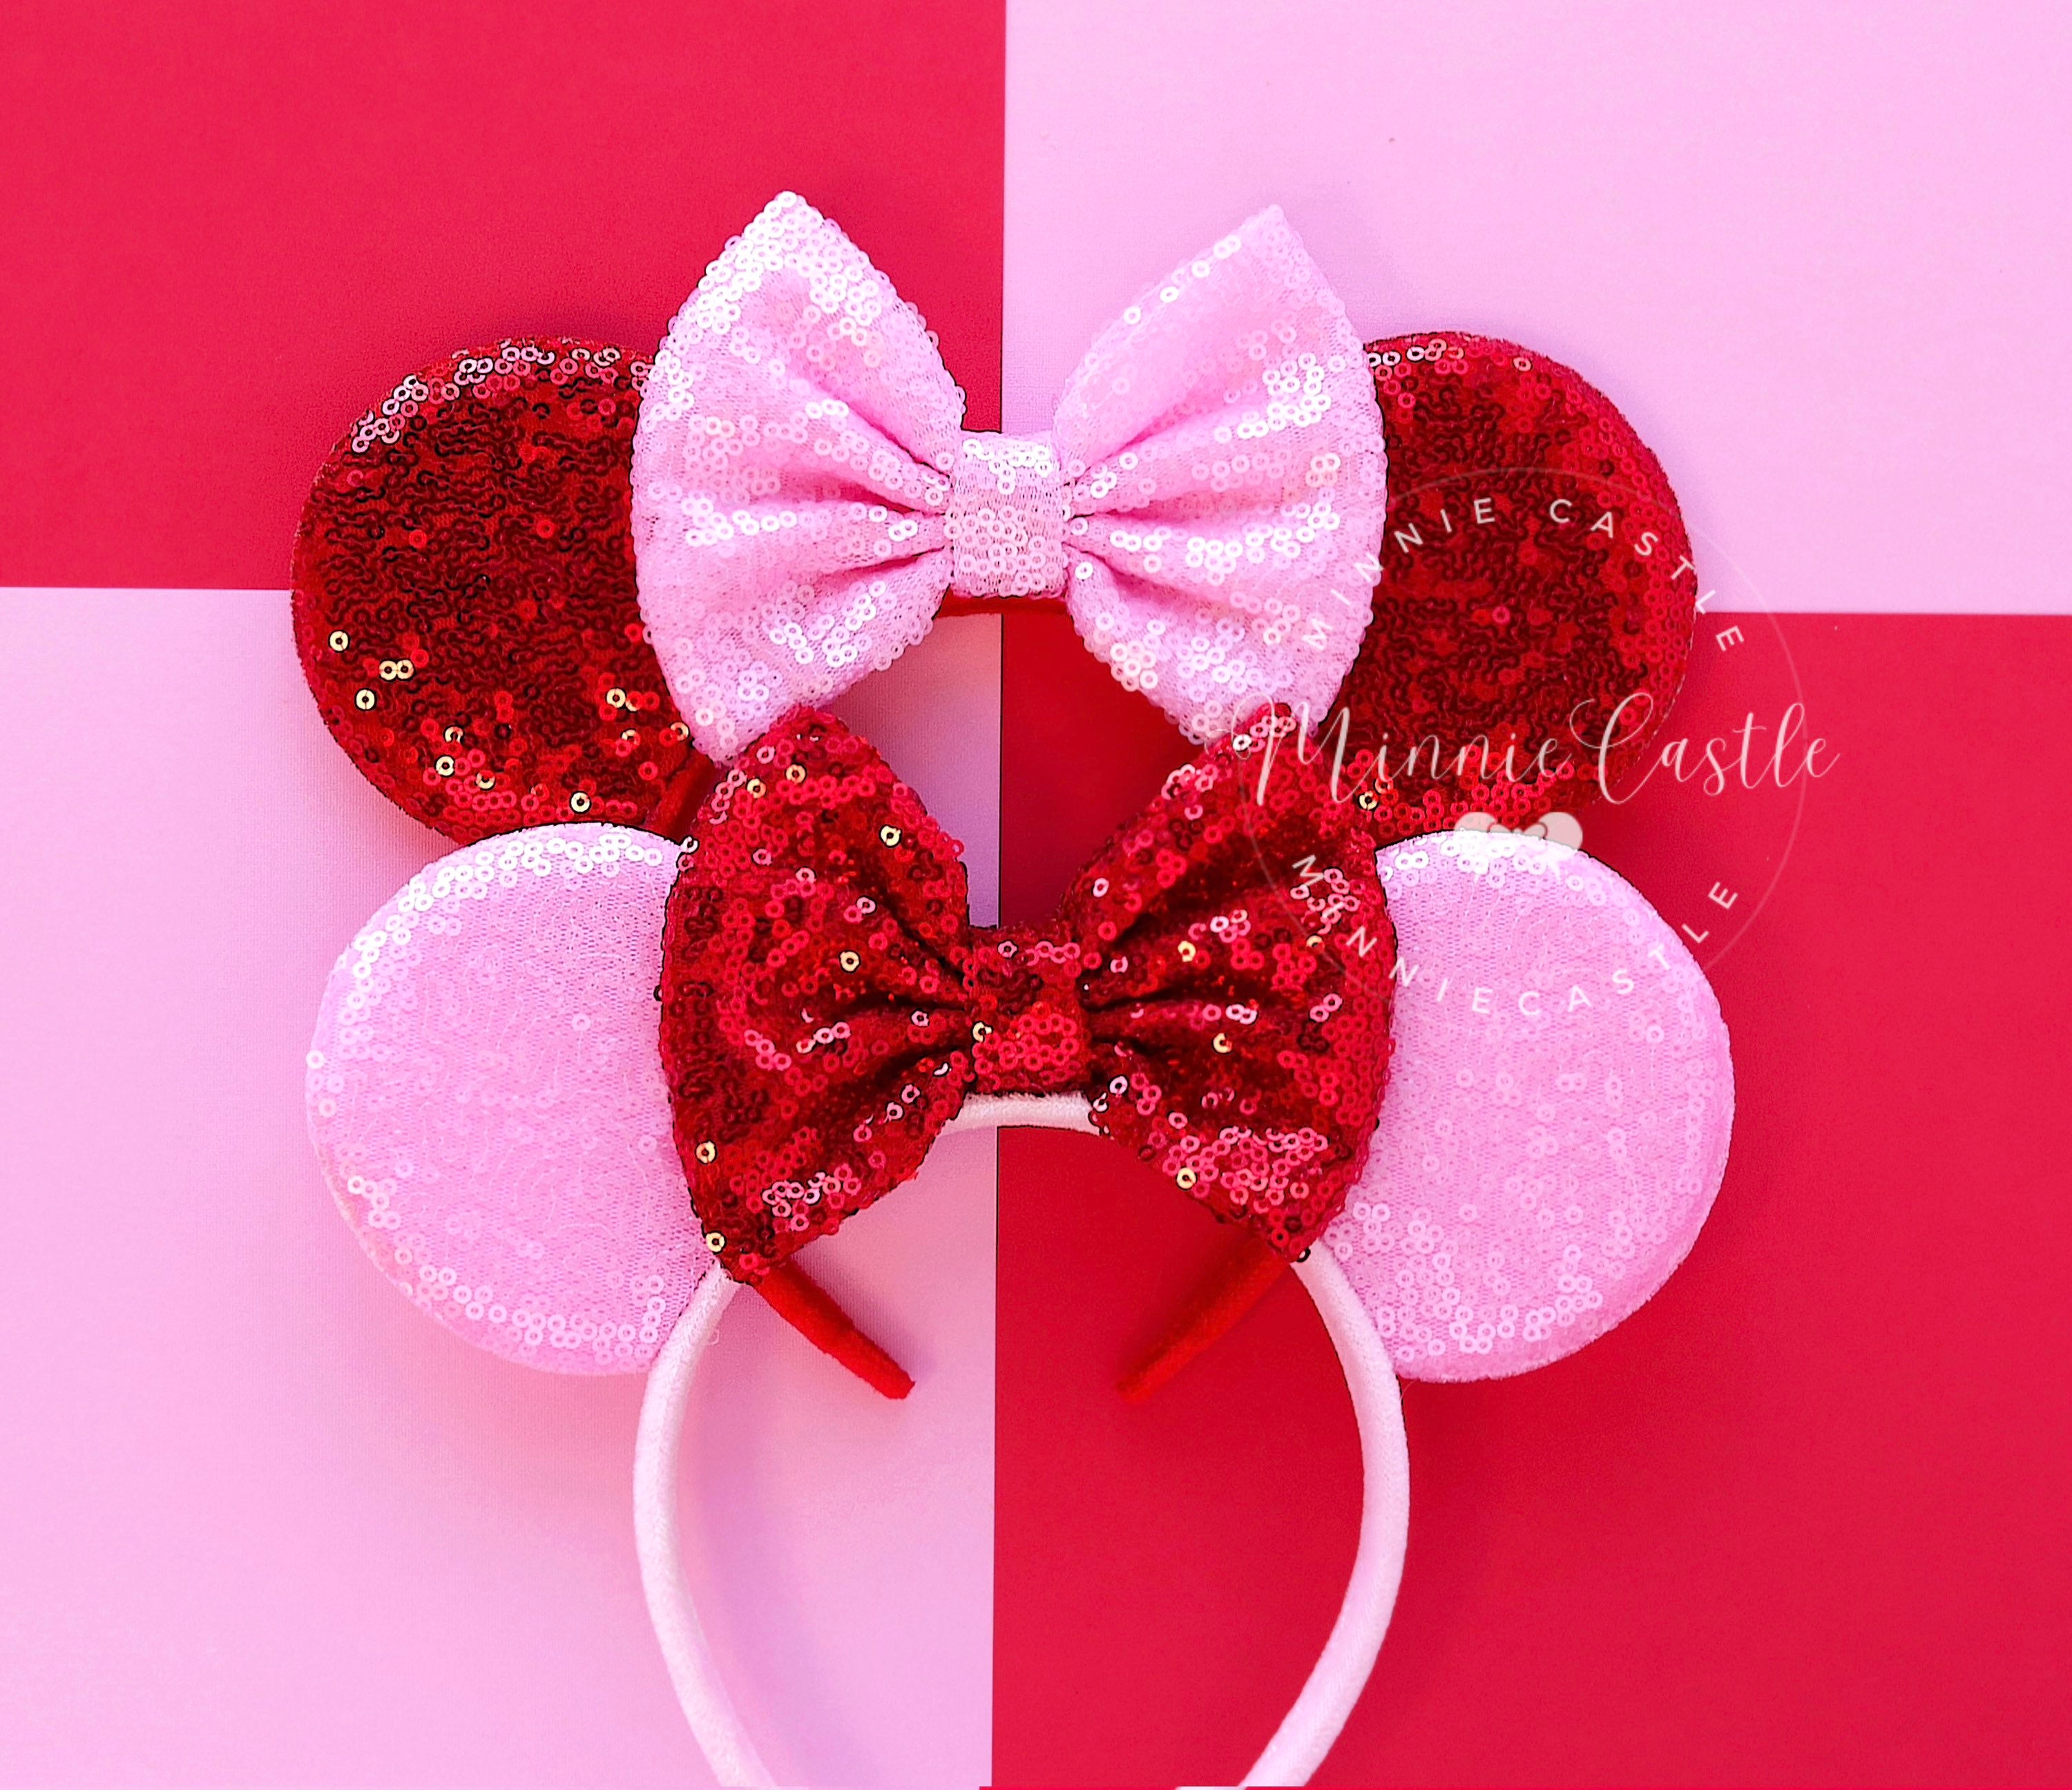 Disney Parks Minnie Mouse Best Day Ever Ear Headband Light Up Red